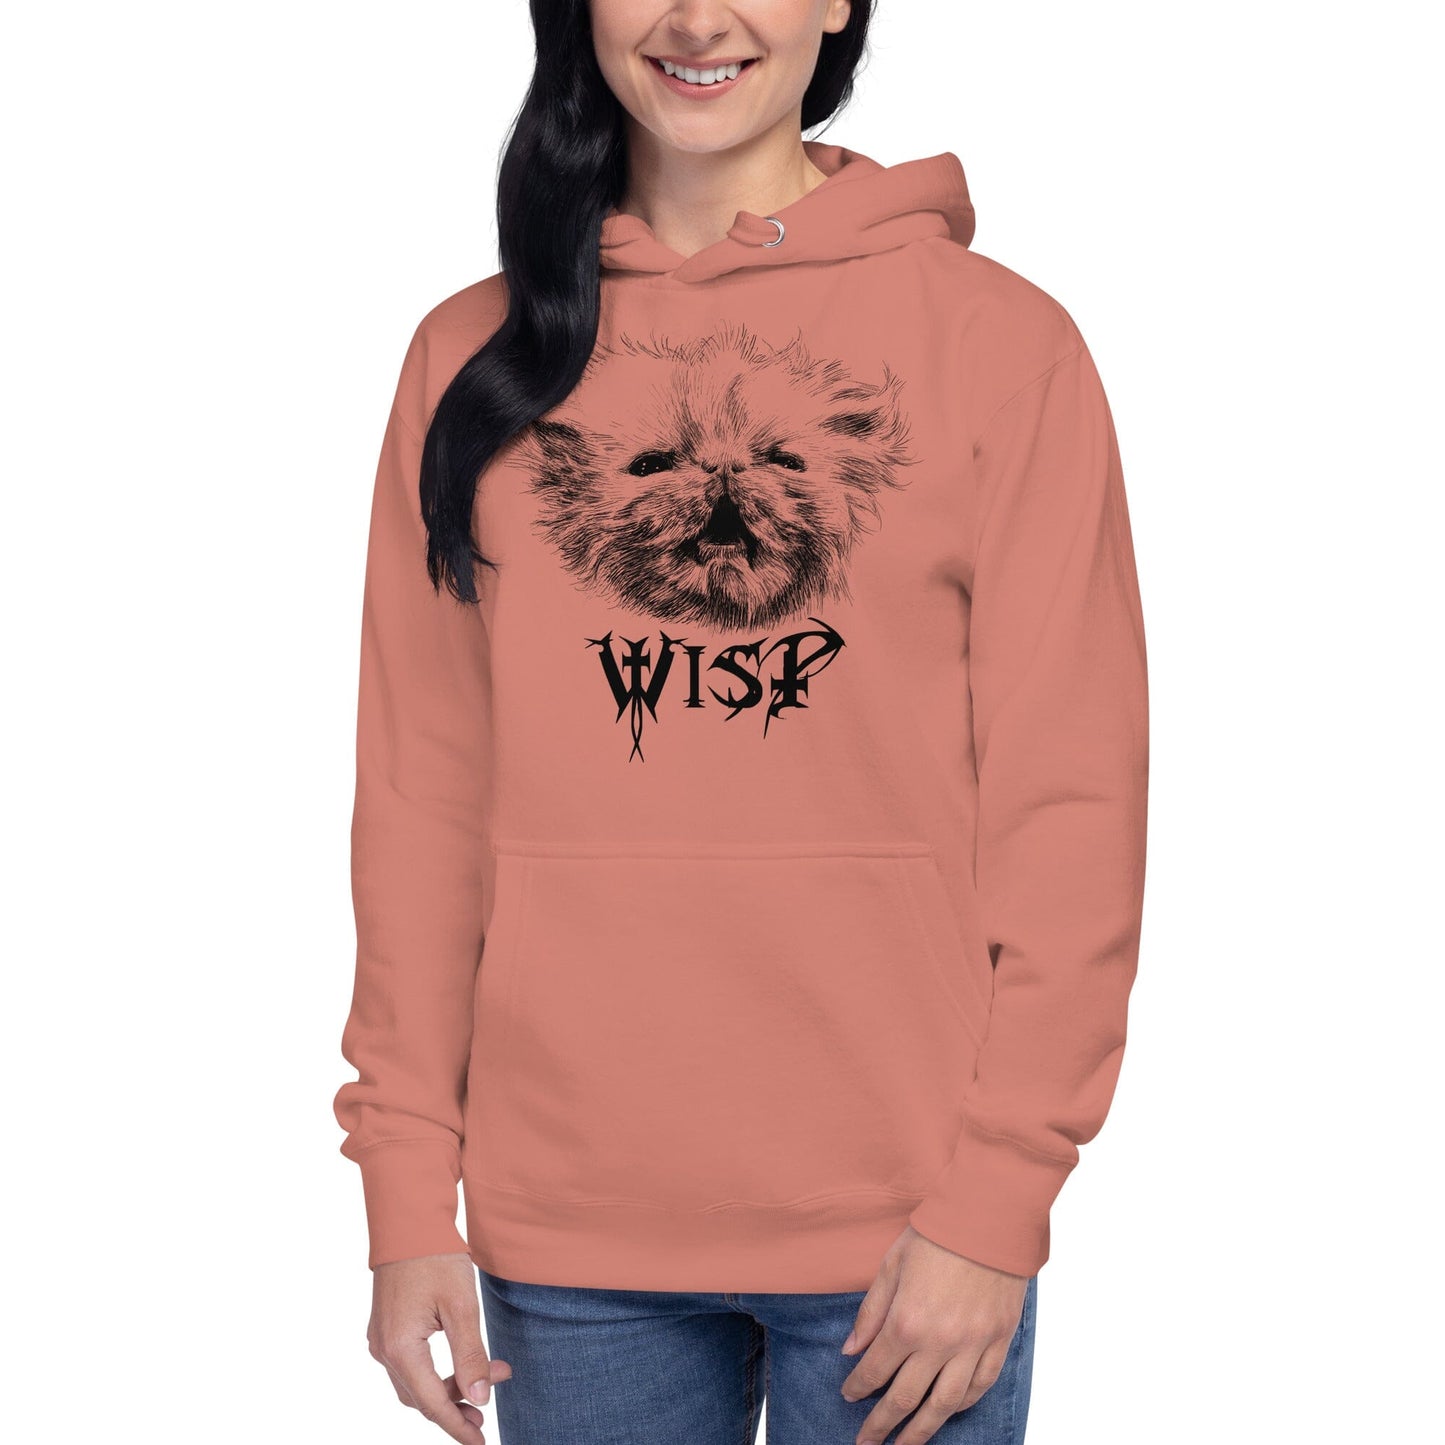 Metal Wisp Hoodie [Unfoiled] (All net proceeds go to Rags to Riches Animal Rescue) JoyousJoyfulJoyness Dusty Rose S 